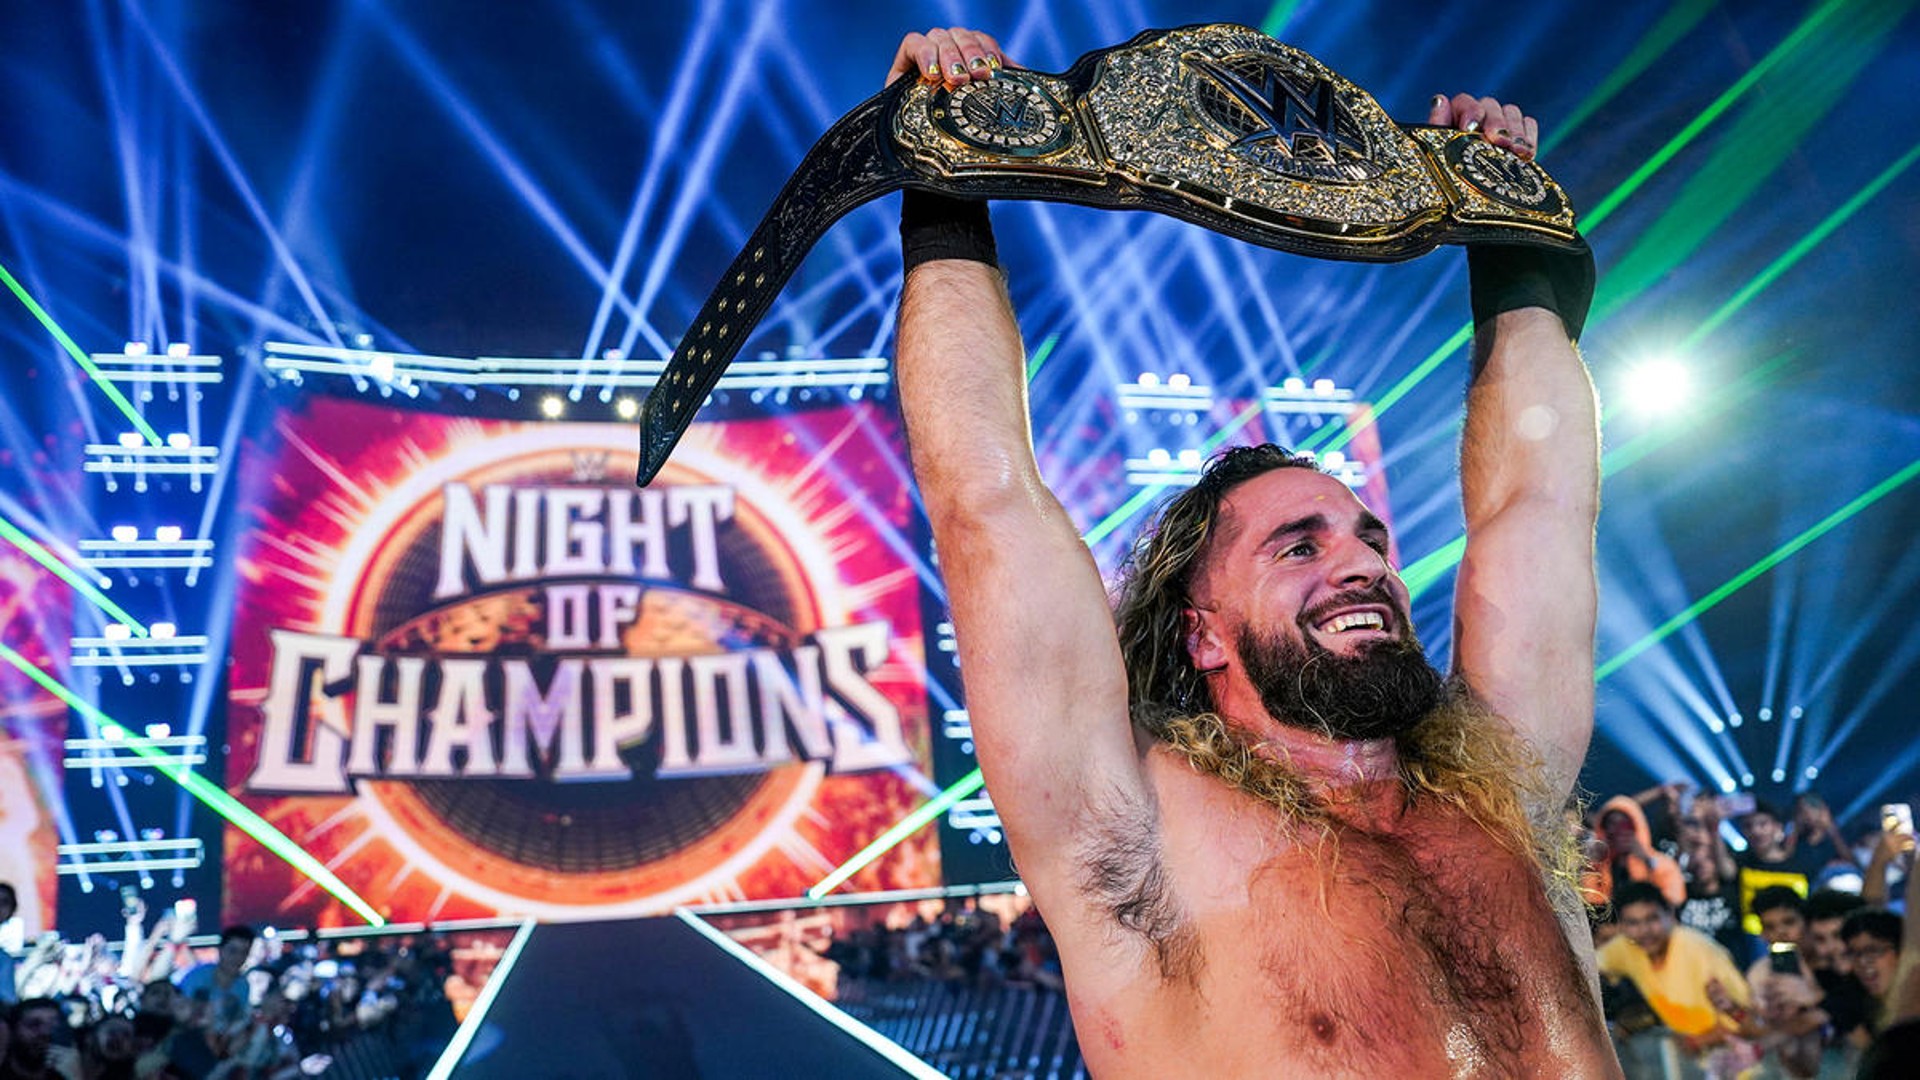 WWE Raw Results (May 29, 2023): Check Out what happens on Monday Night Raw following WWE Night of Champions 2023; Follow the WWE Raw Live Updates